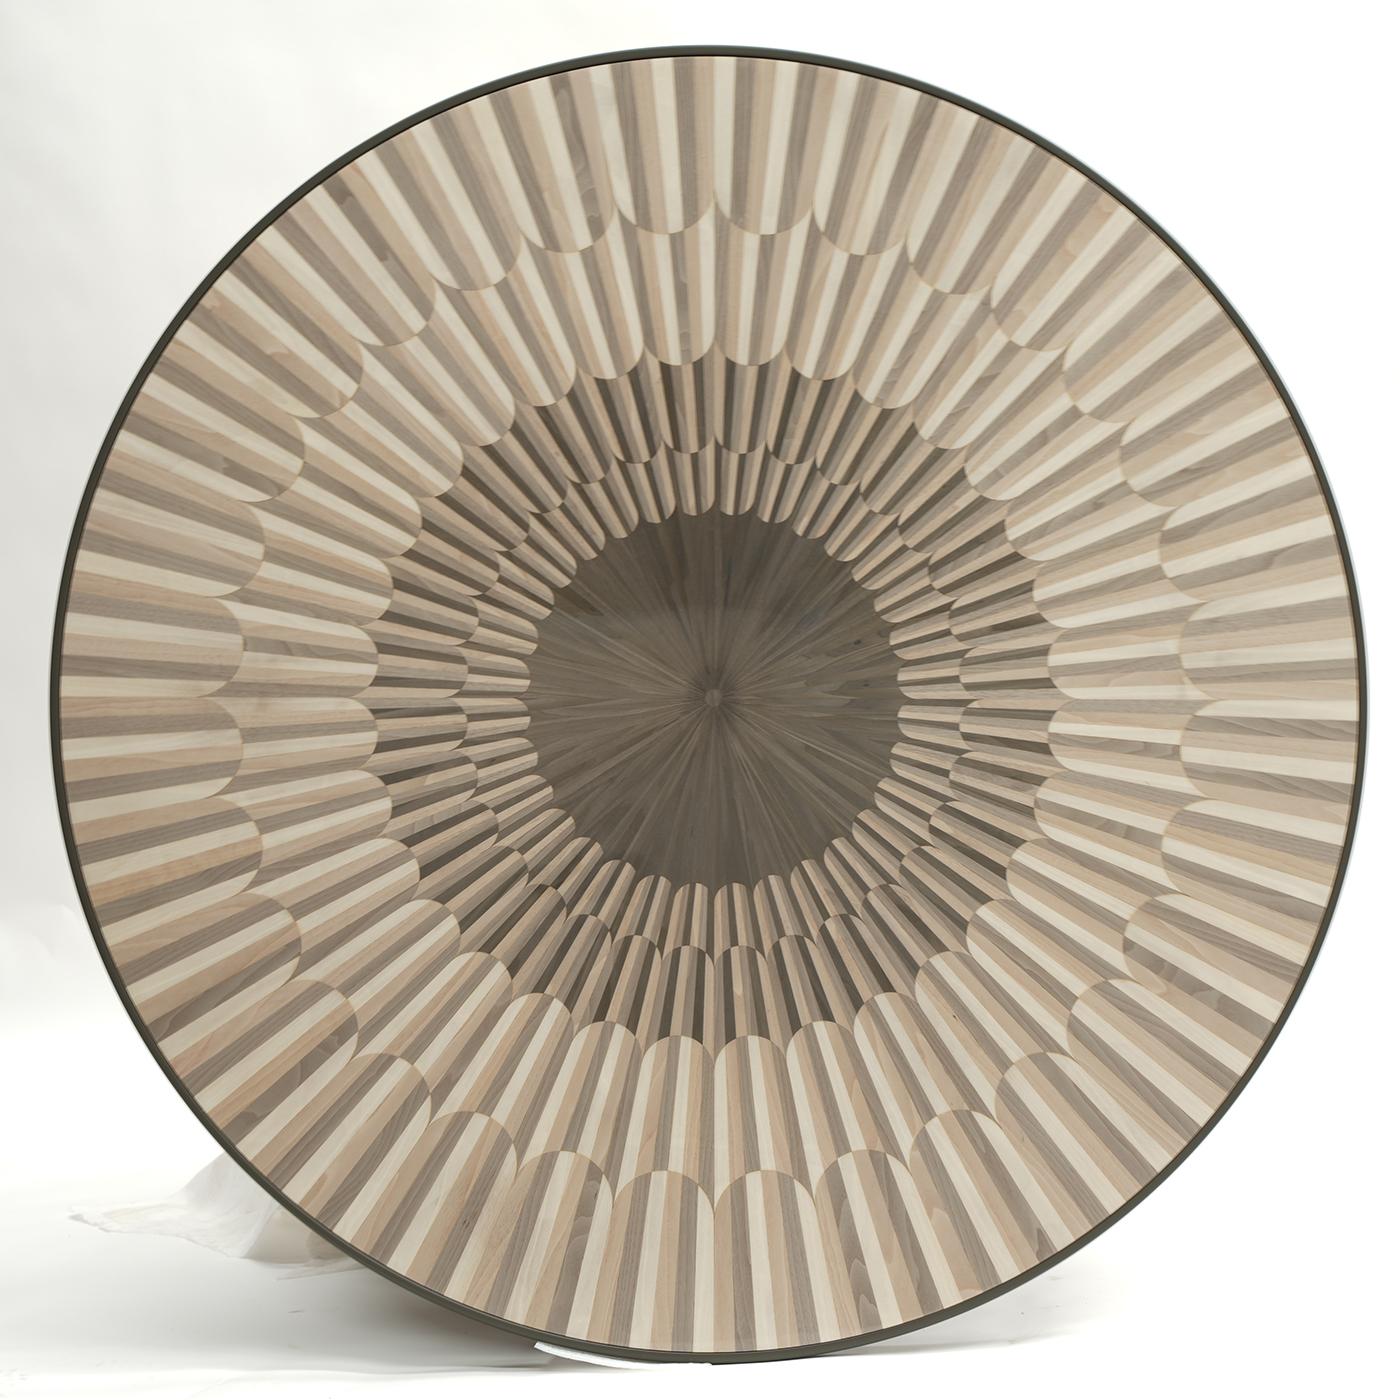 A mesmerizing pattern obtained with minute contrasting wooden inlays characterizes this exclusive coffee table. Veneered in Bolivar wood, the wide round top reveals a truly hypnotizing flair, while the rest of the wooden structure gets enriched with